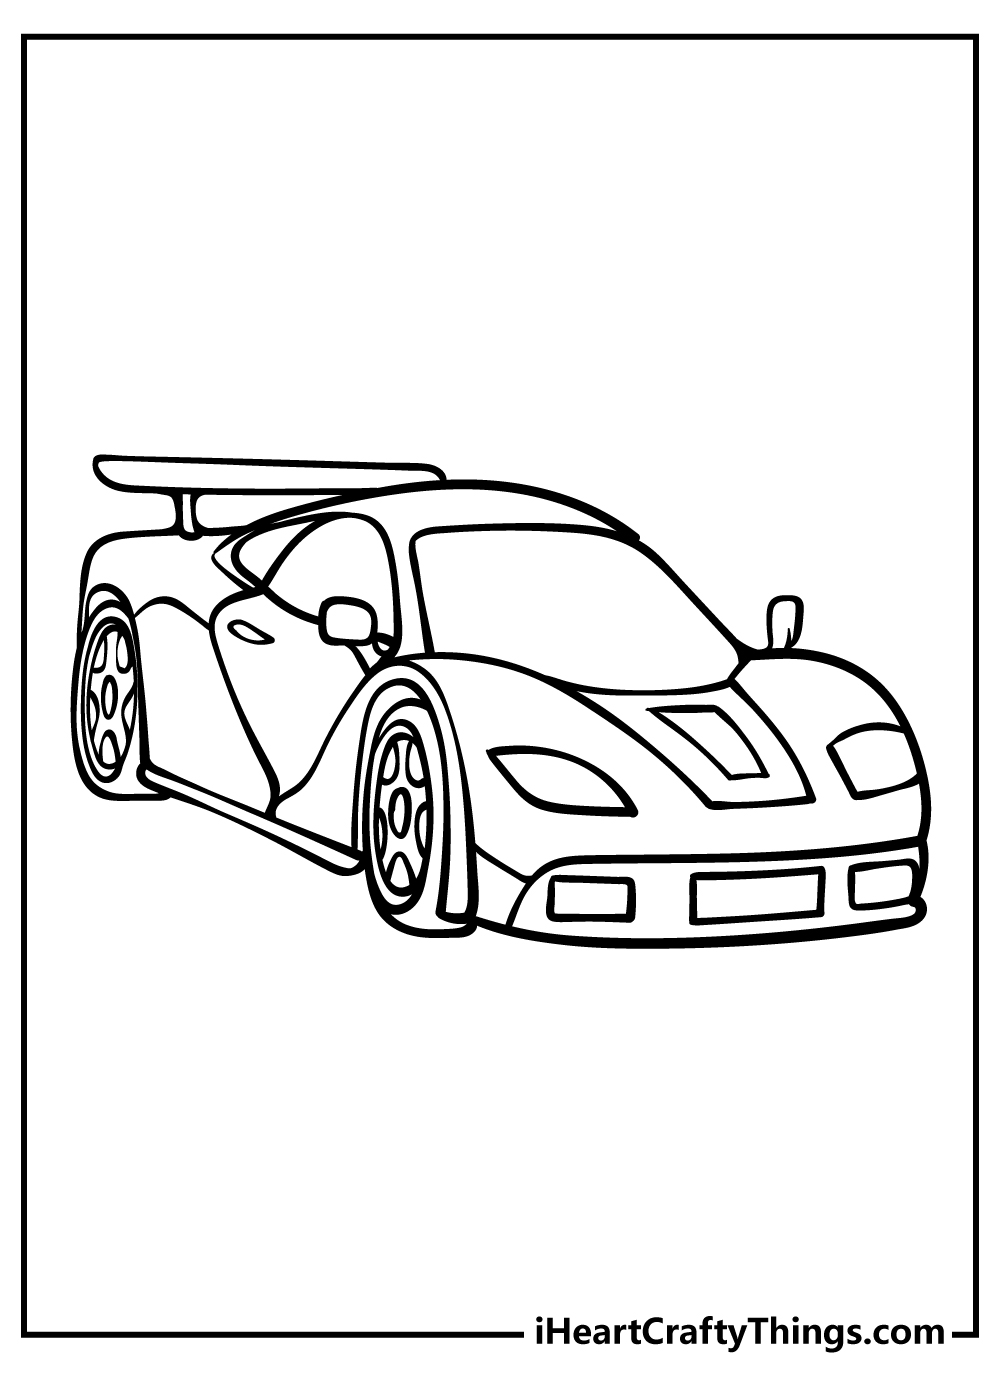 Race Car Coloring Pages for kids free download